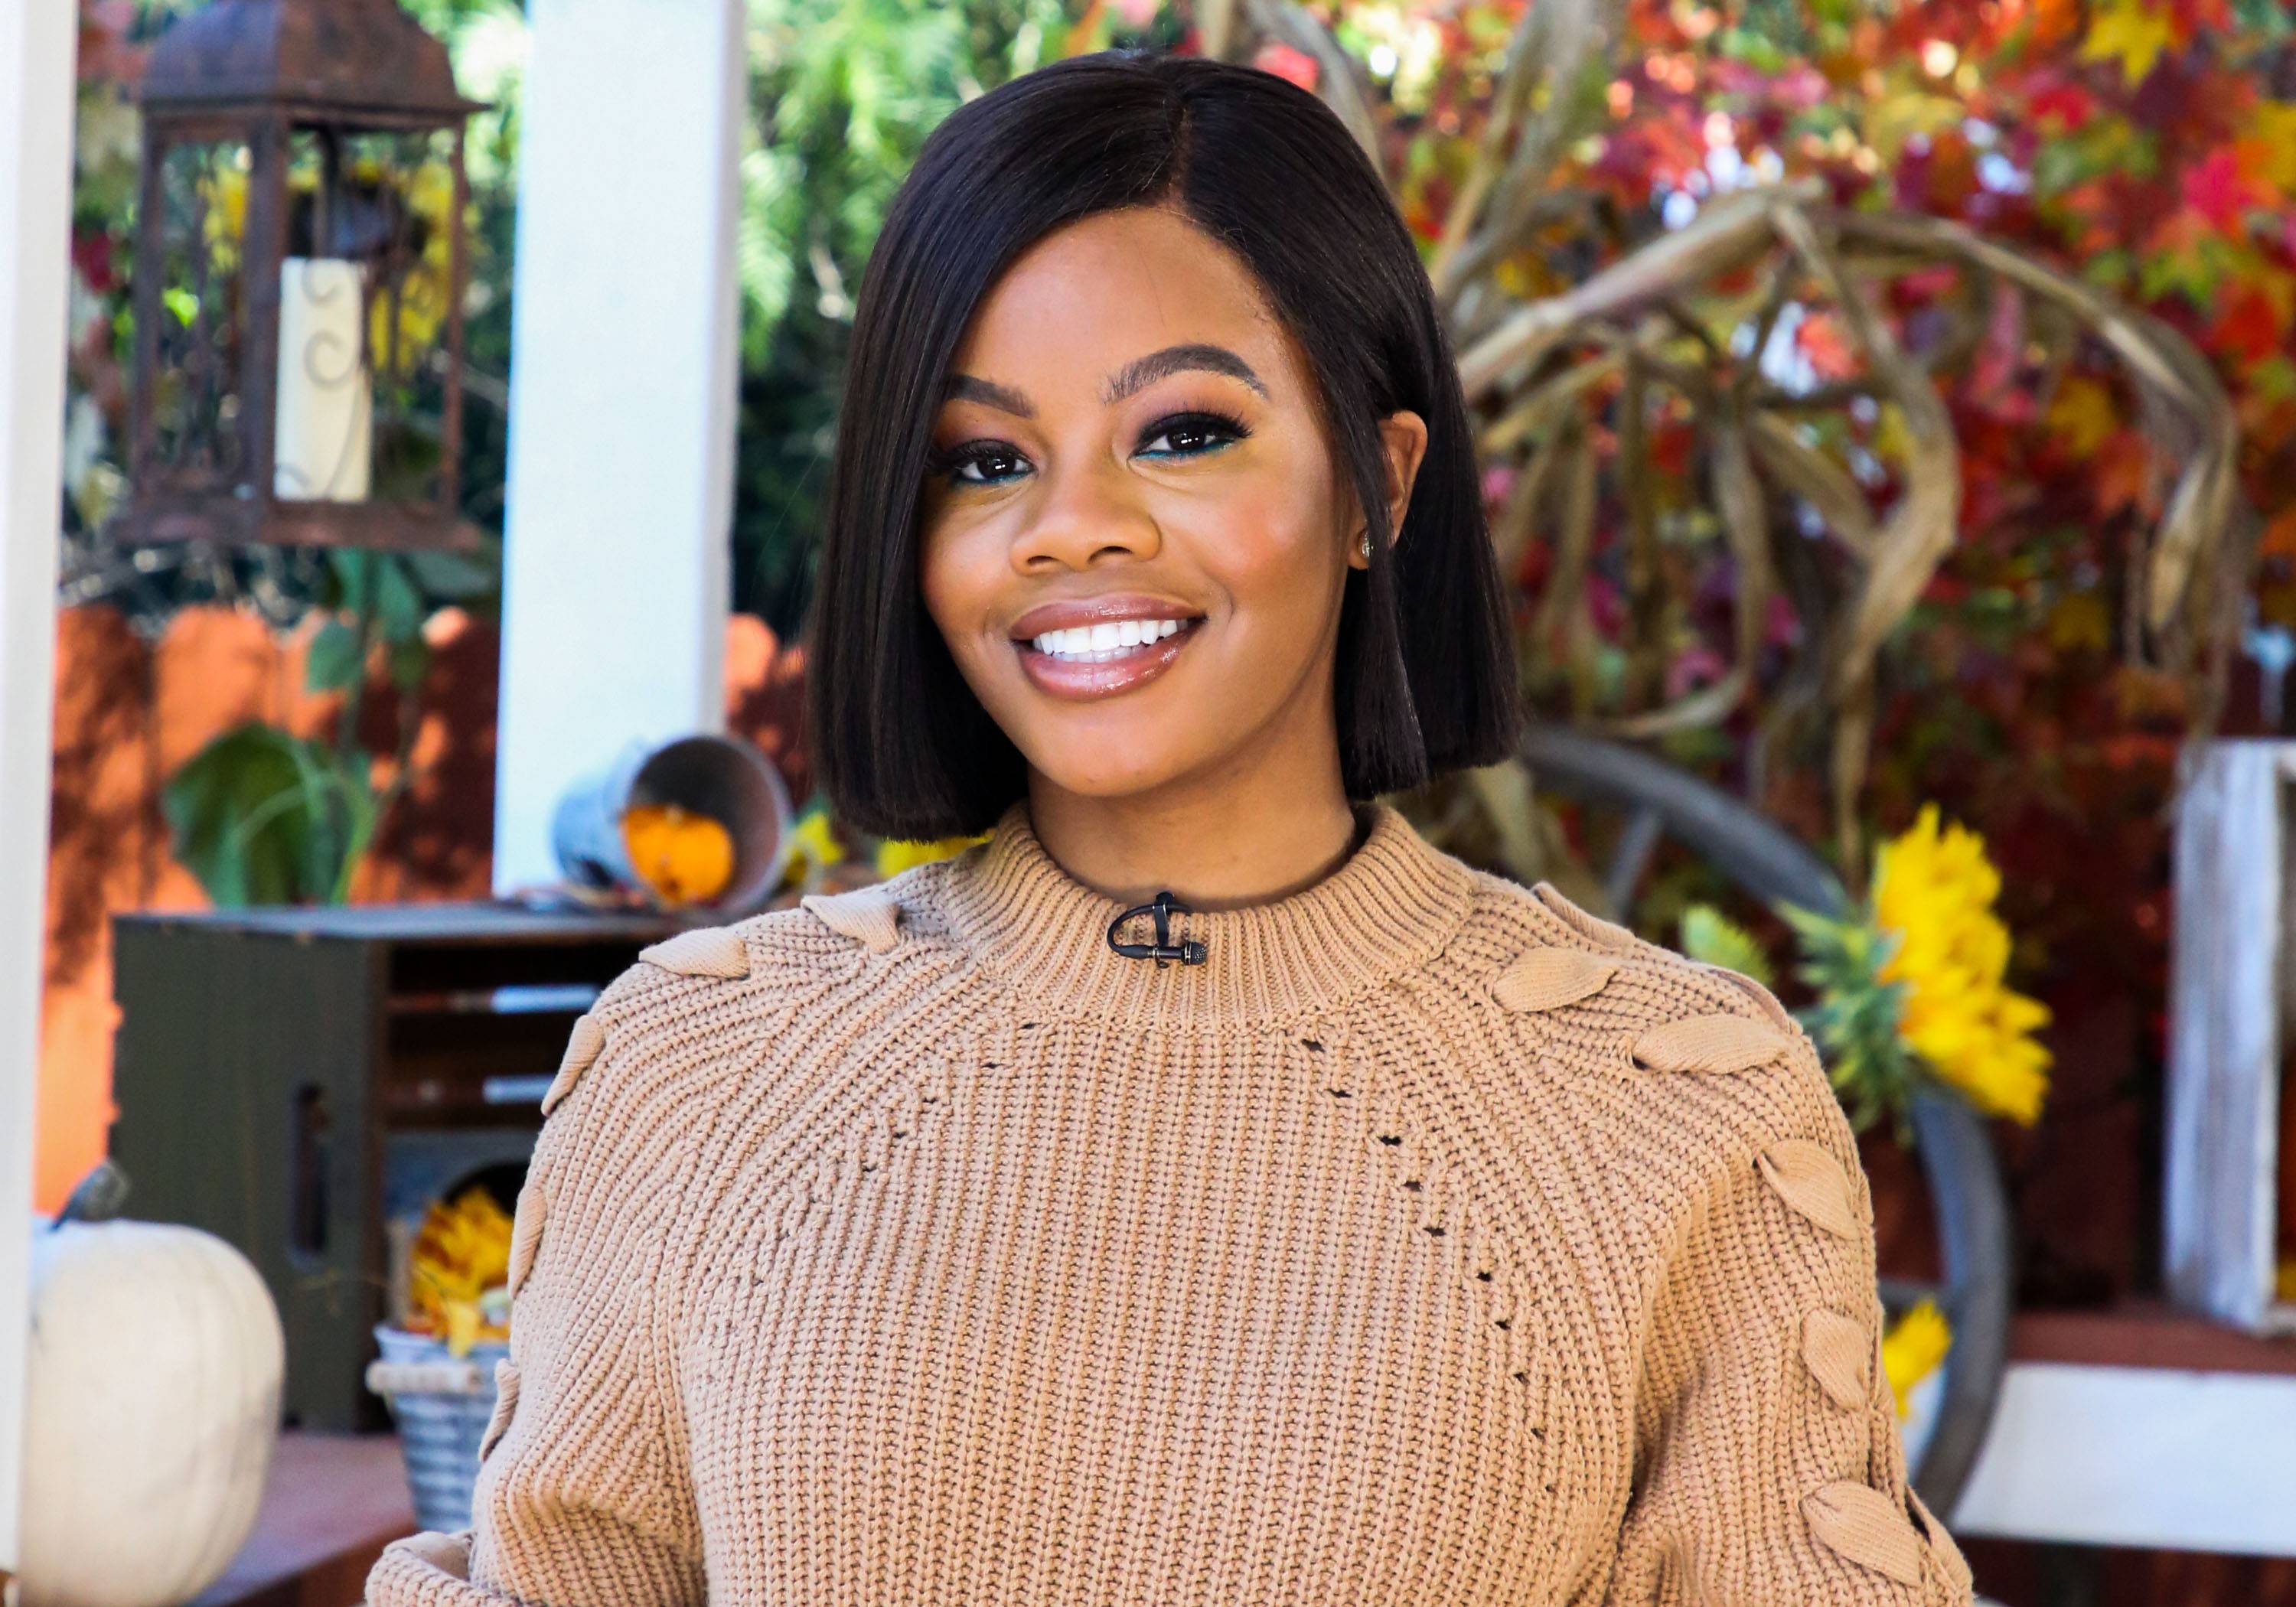 UNIVERSAL CITY, CA - OCTOBER 18:  Actress / Olympic Athlete Gabby Douglas visits Hallmark's "Home & Family" at Universal Studios Hollywood on October 18, 2018 in Universal City, California.  (Photo by Paul Archuleta/Getty Images)